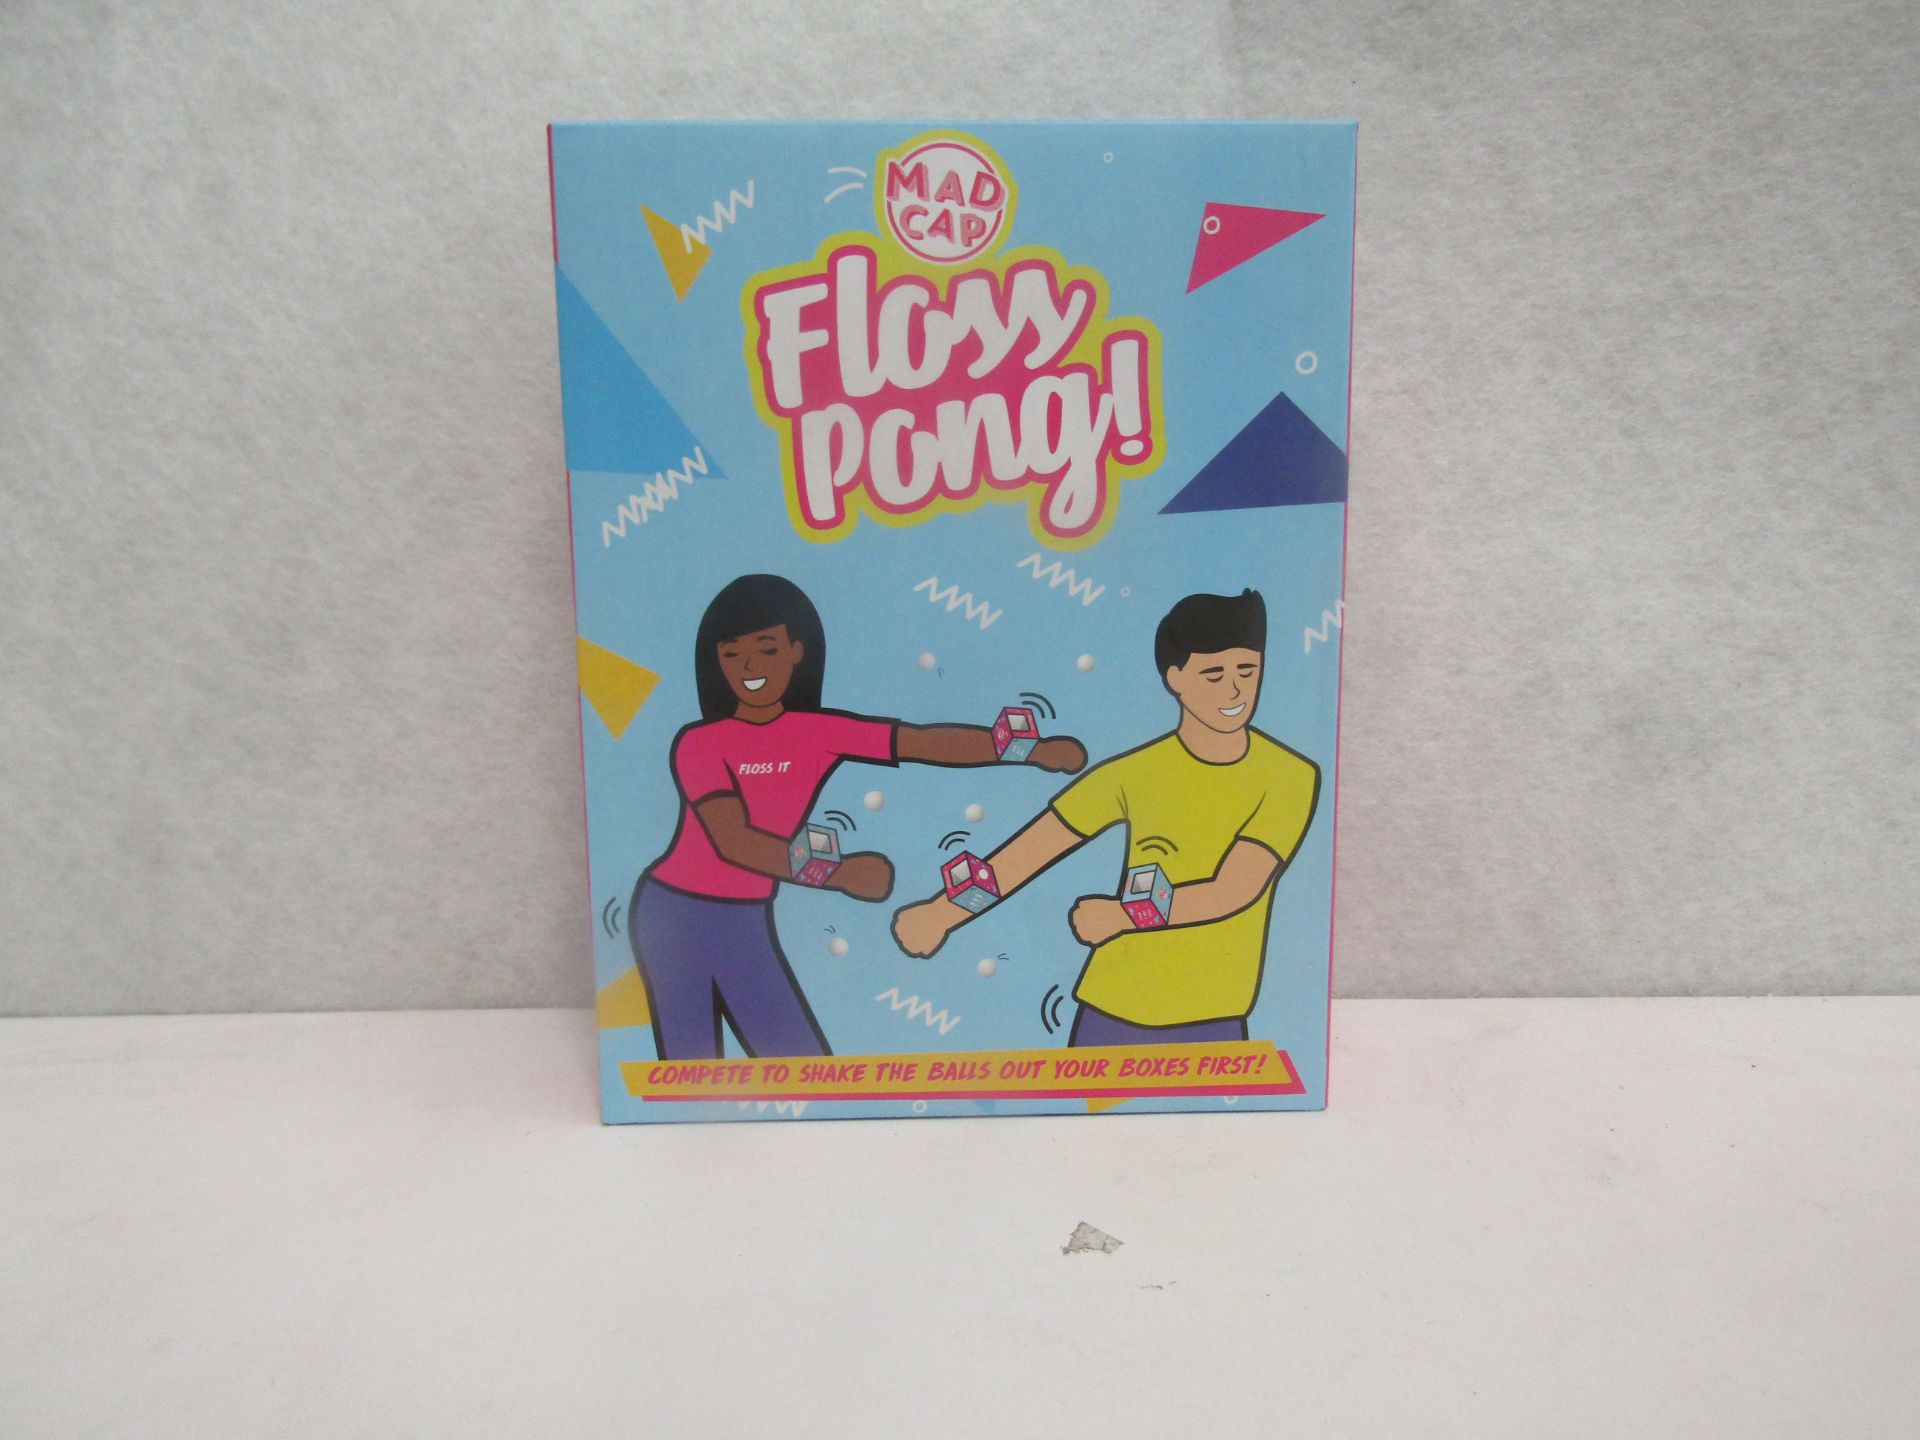 24x MadCap - Floss Pong Game - New & Boxed.